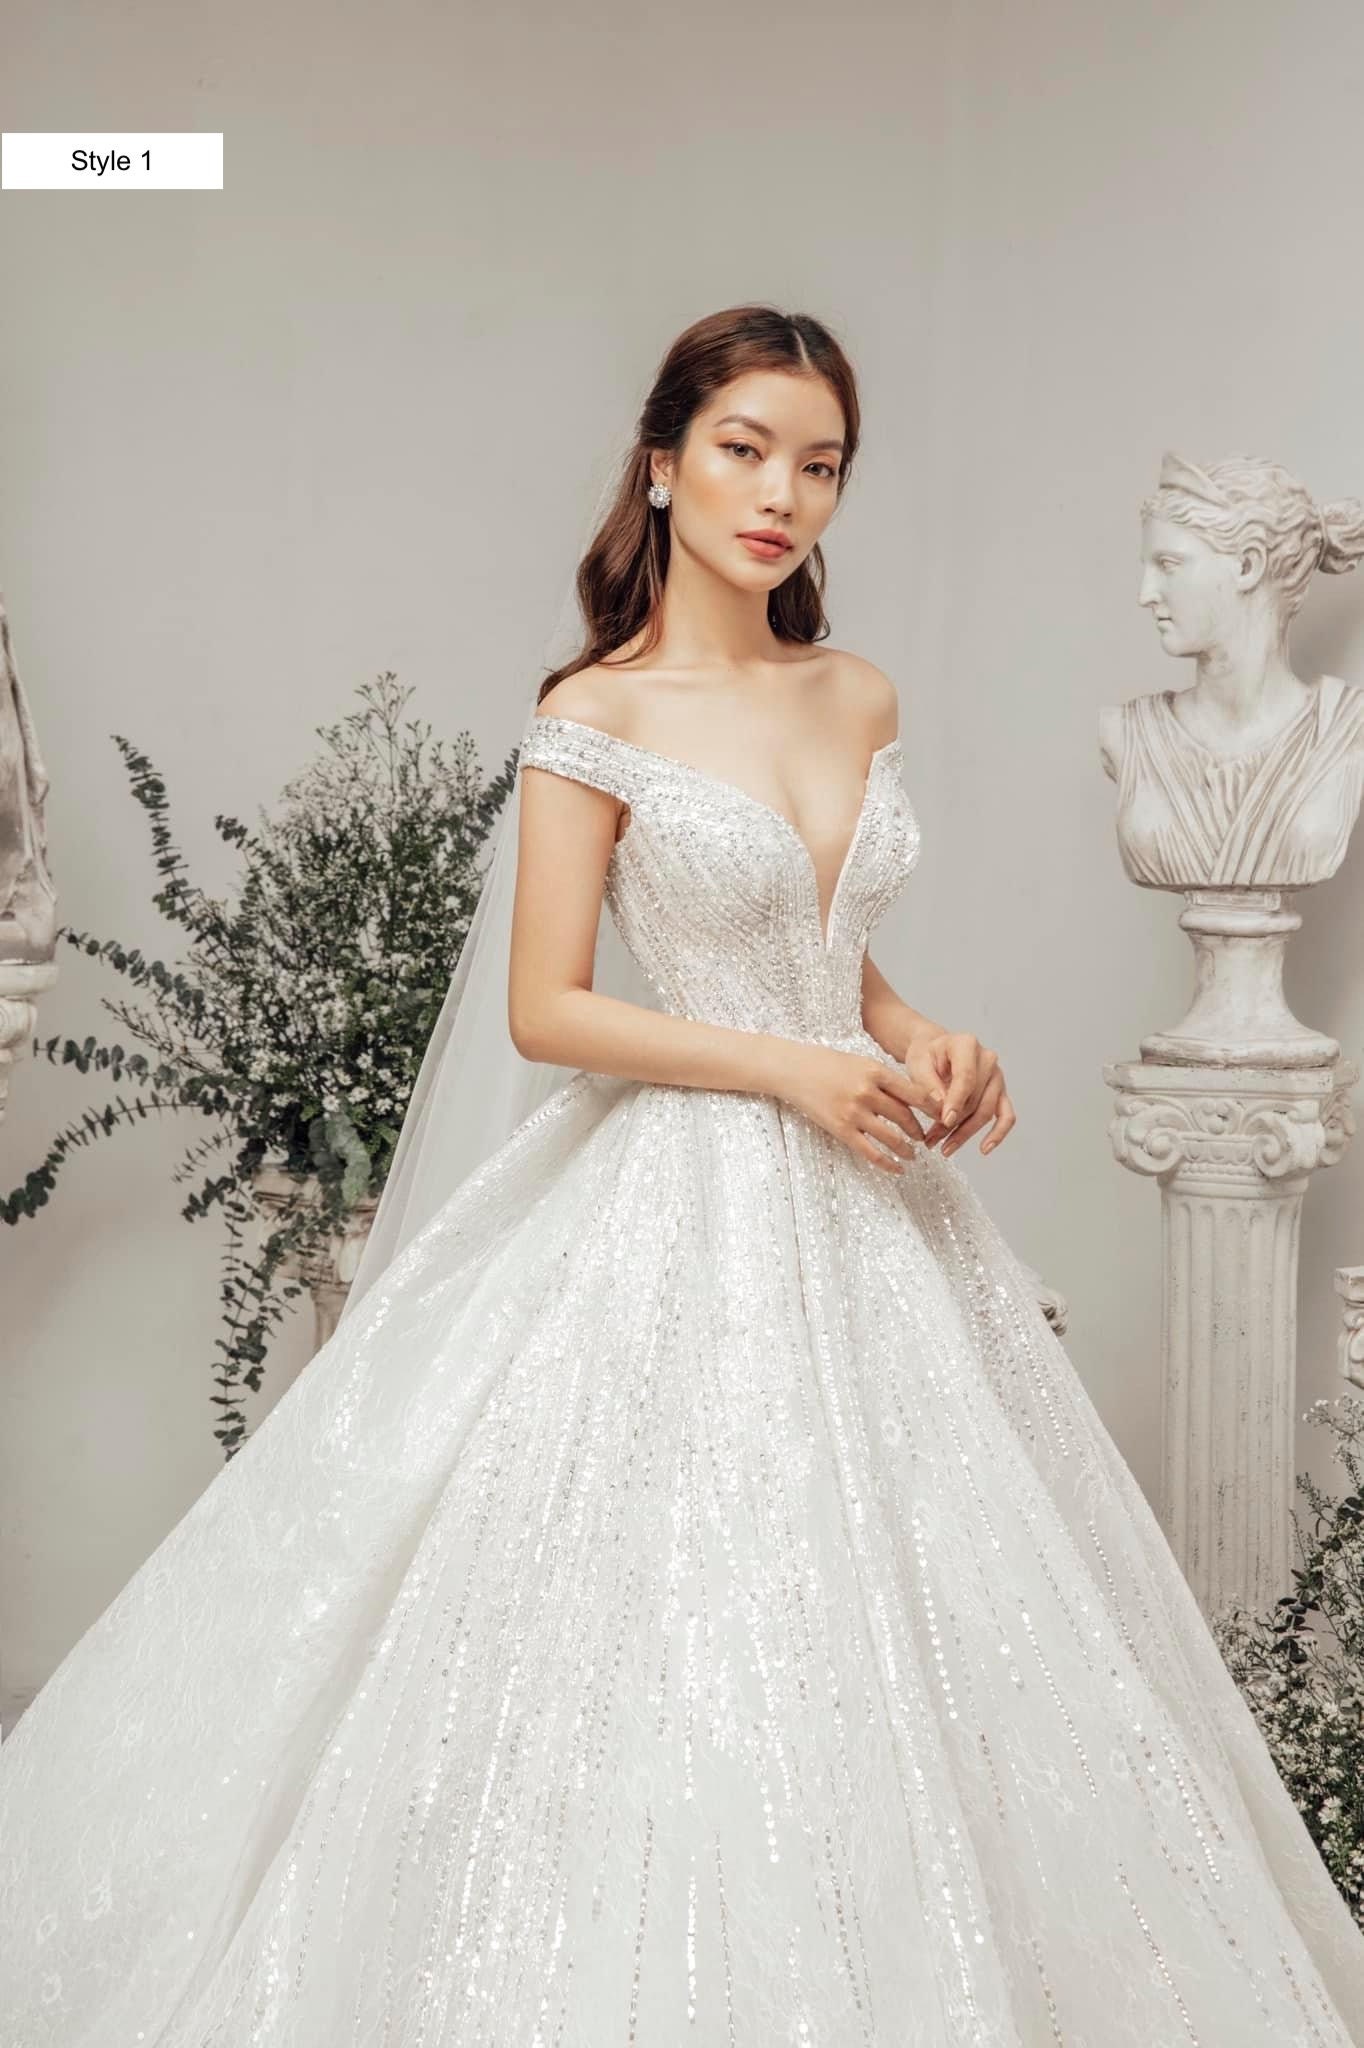 2019 Unique Design Ball Gown Evening Dresses Illusion High Neck Evening  Dress Glitter Crystal Prom Dress Robe De Soiree - Evening Dresses -  AliExpress